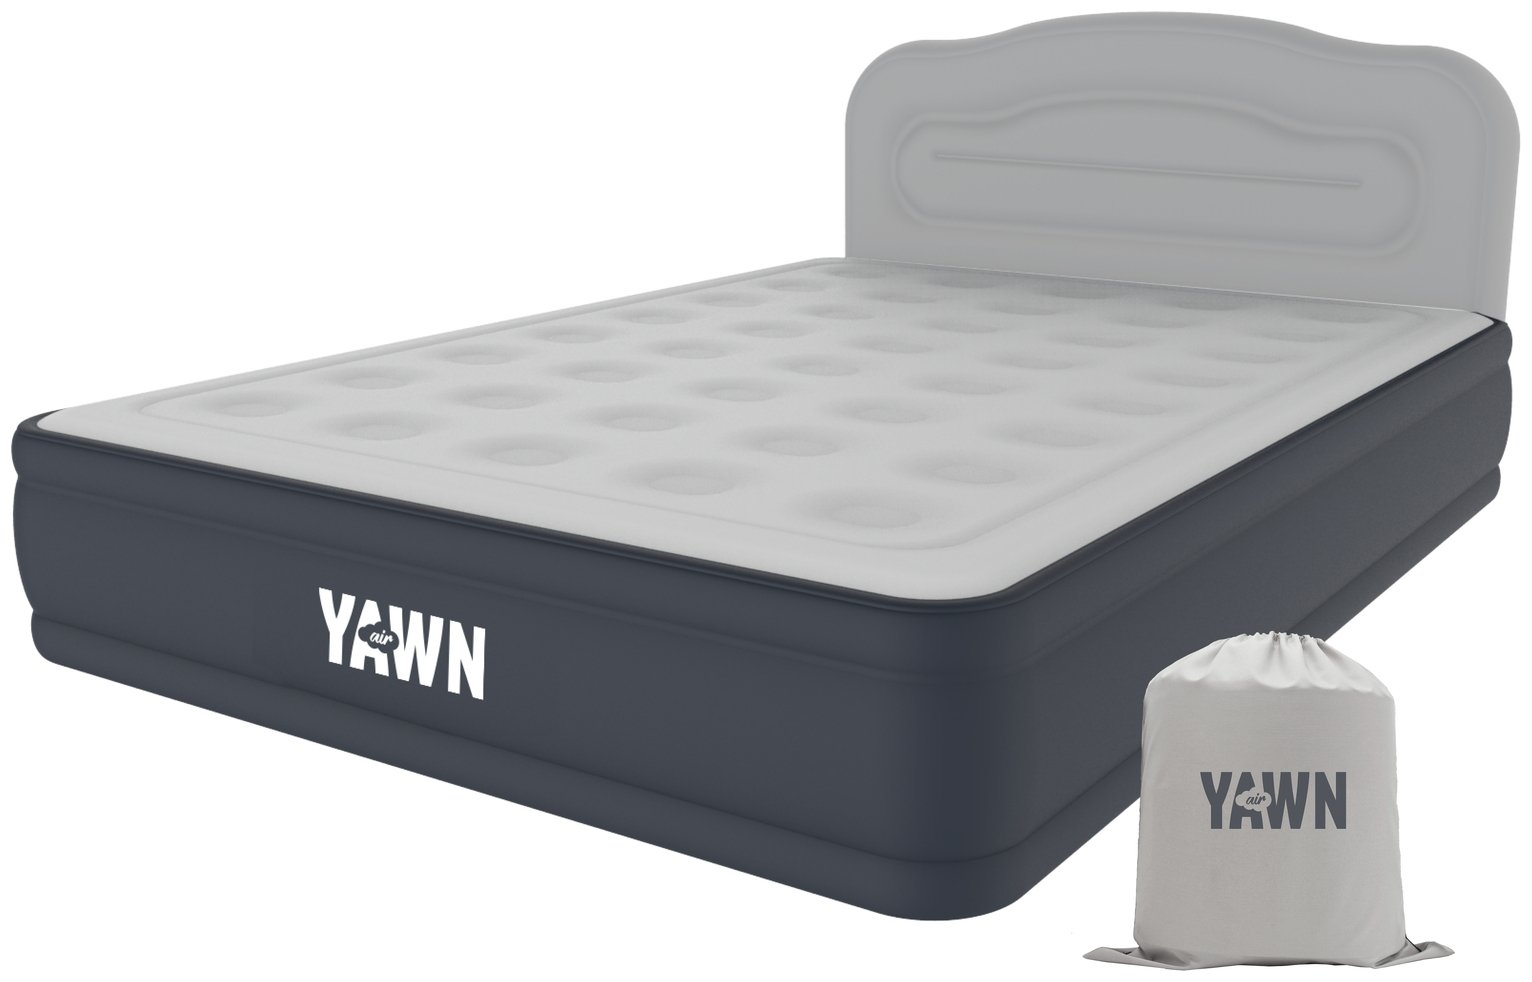 Yawn Luxury Raised Air Bed With Headboard - Kingsize